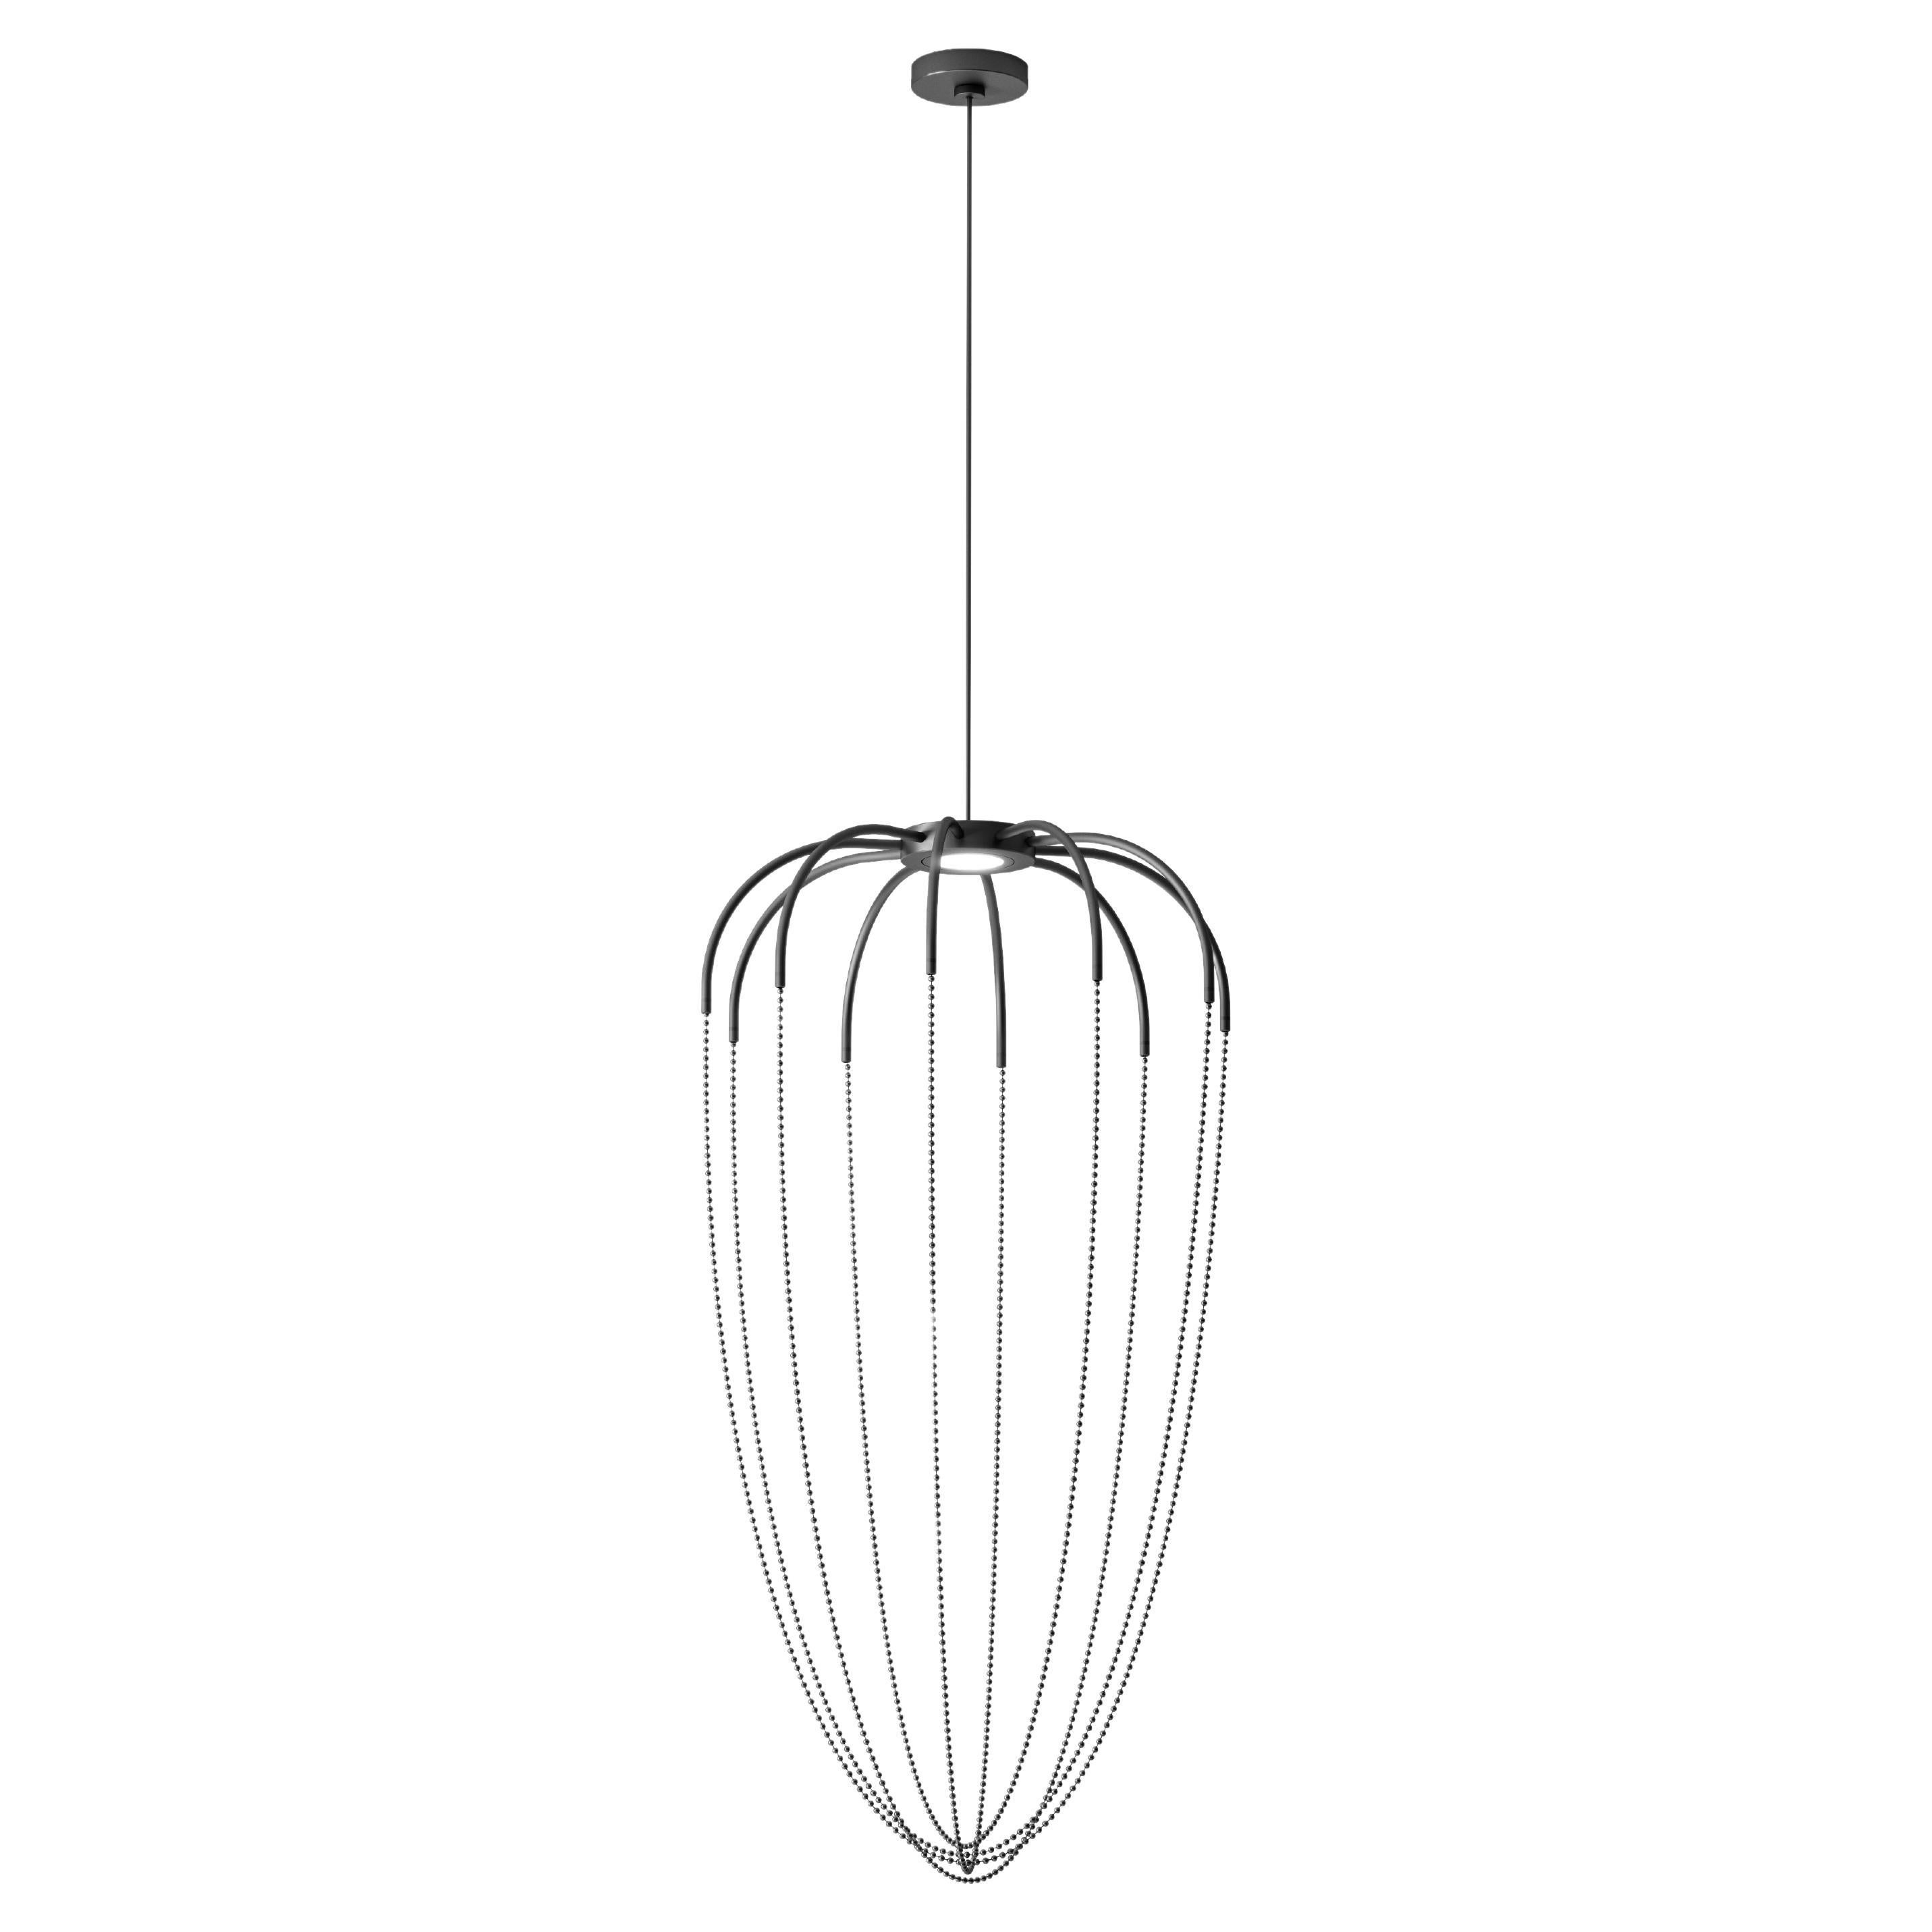 Axolight Alysoid Large Pendant Lamp in Anthracite Grey with Nickel Chains For Sale